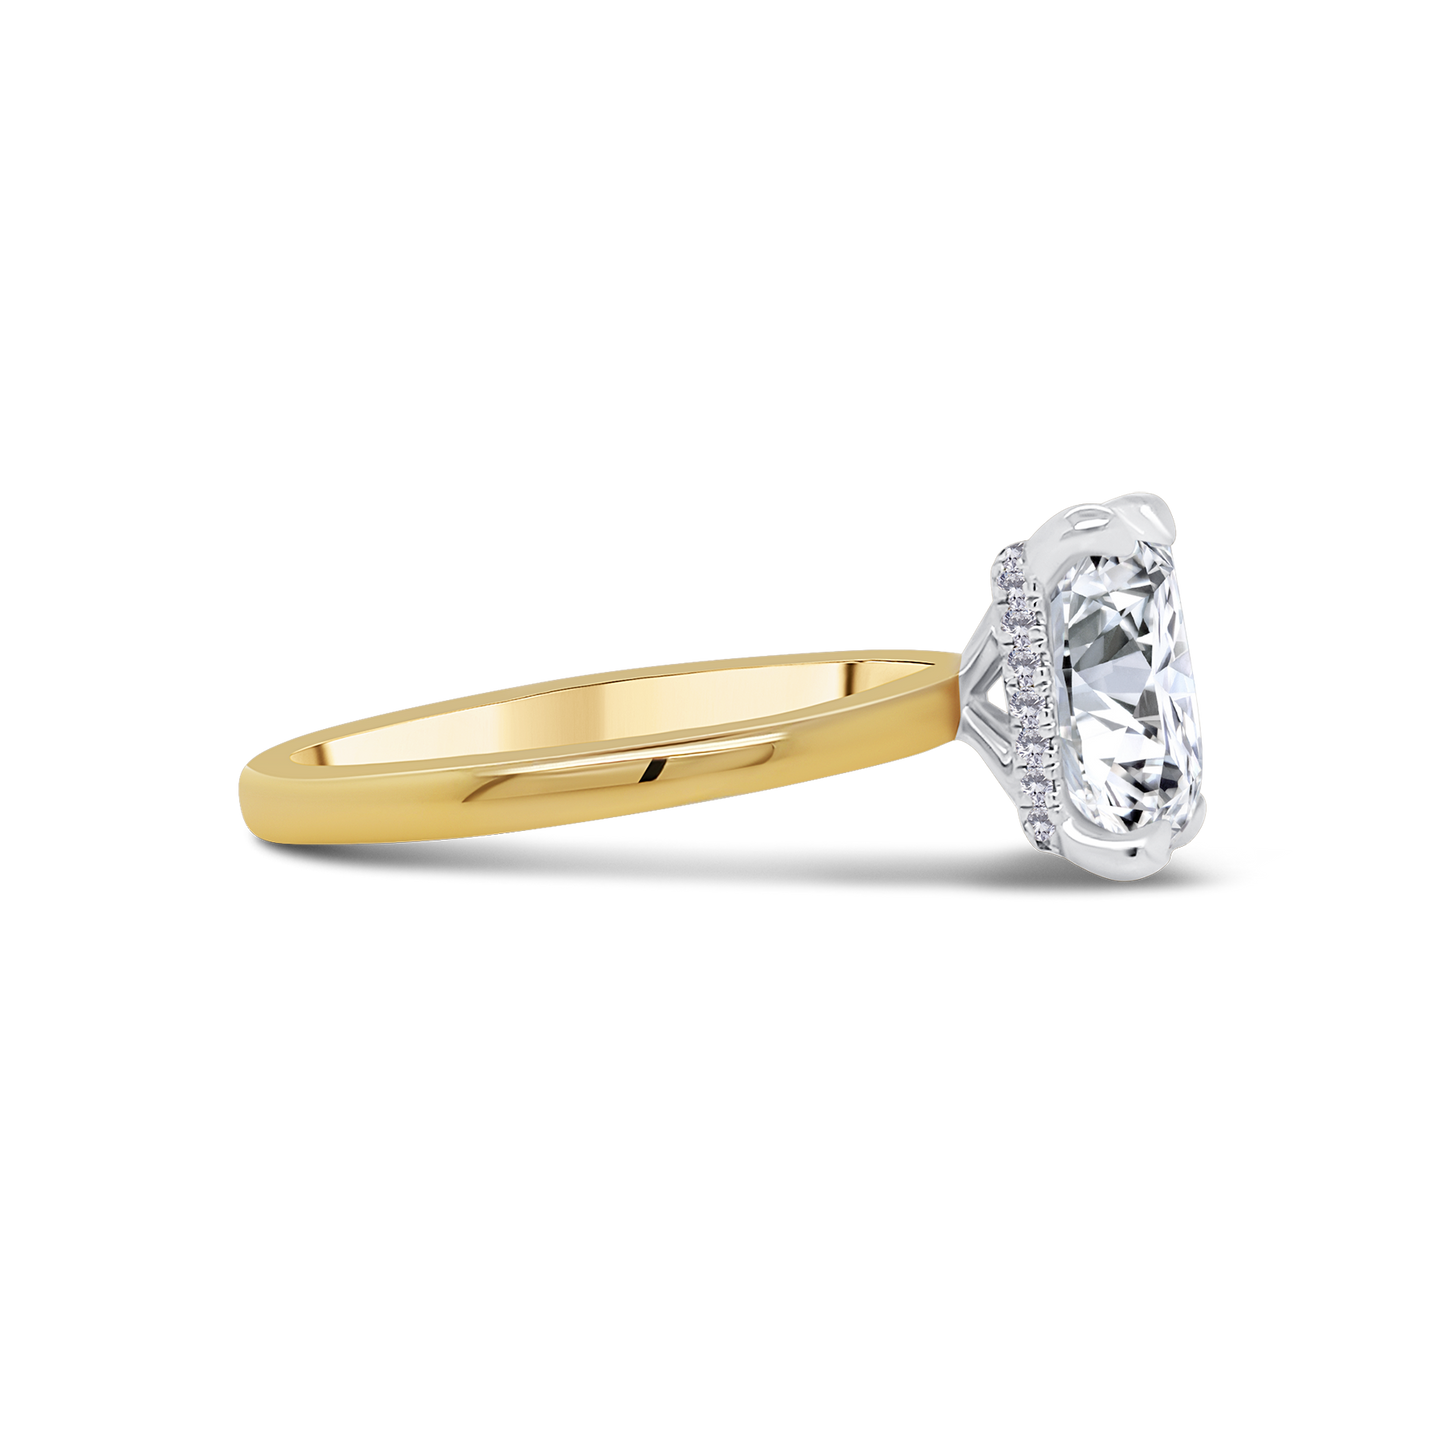 Laboratory Grown Radiant & Diamond Detailed Ring, 18ct Yellow Gold 2.06ct